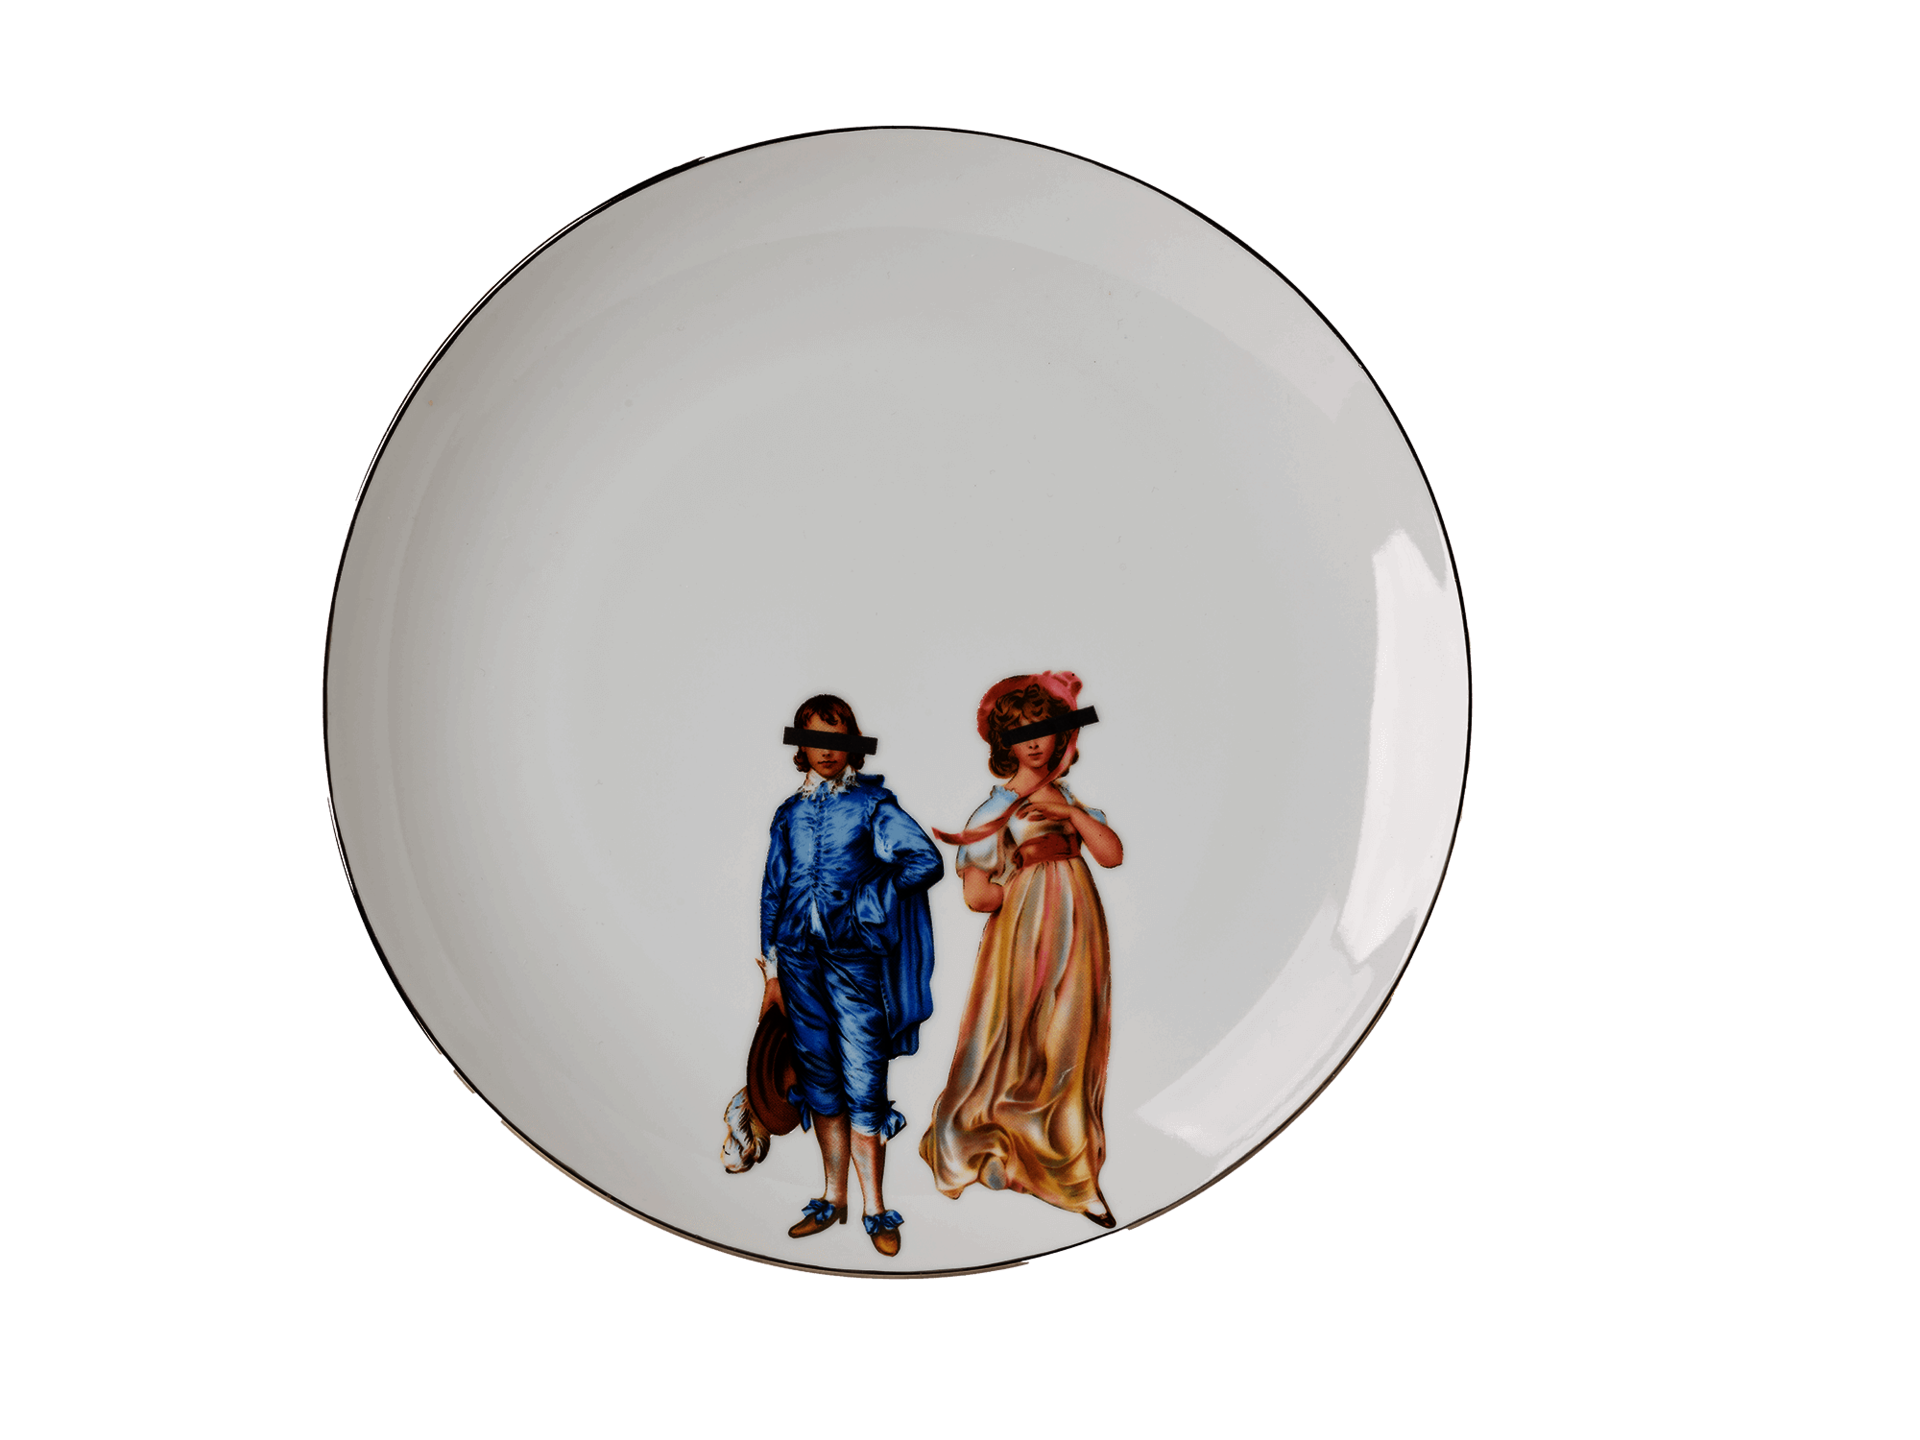 A white ceramic plate with an illustration of a Victorian-style man and woman with black bars covering their eyes